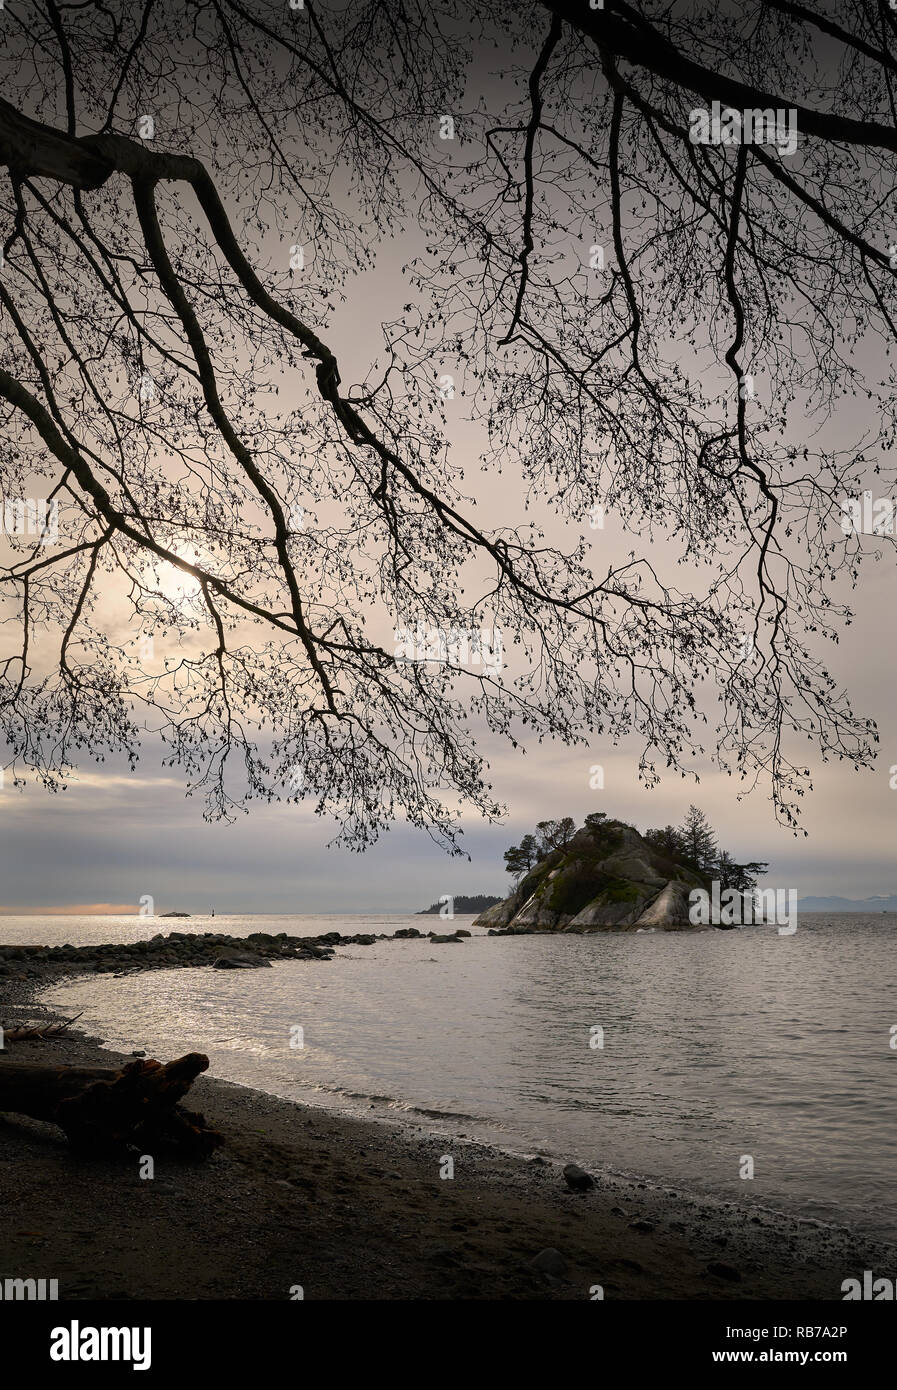 Whytecliff Park, West Vancouver, BC. Whyte Island in, Whytecliff Park, is accessible for climbing and exploring at low tide. West Vancouver, British C Stock Photo